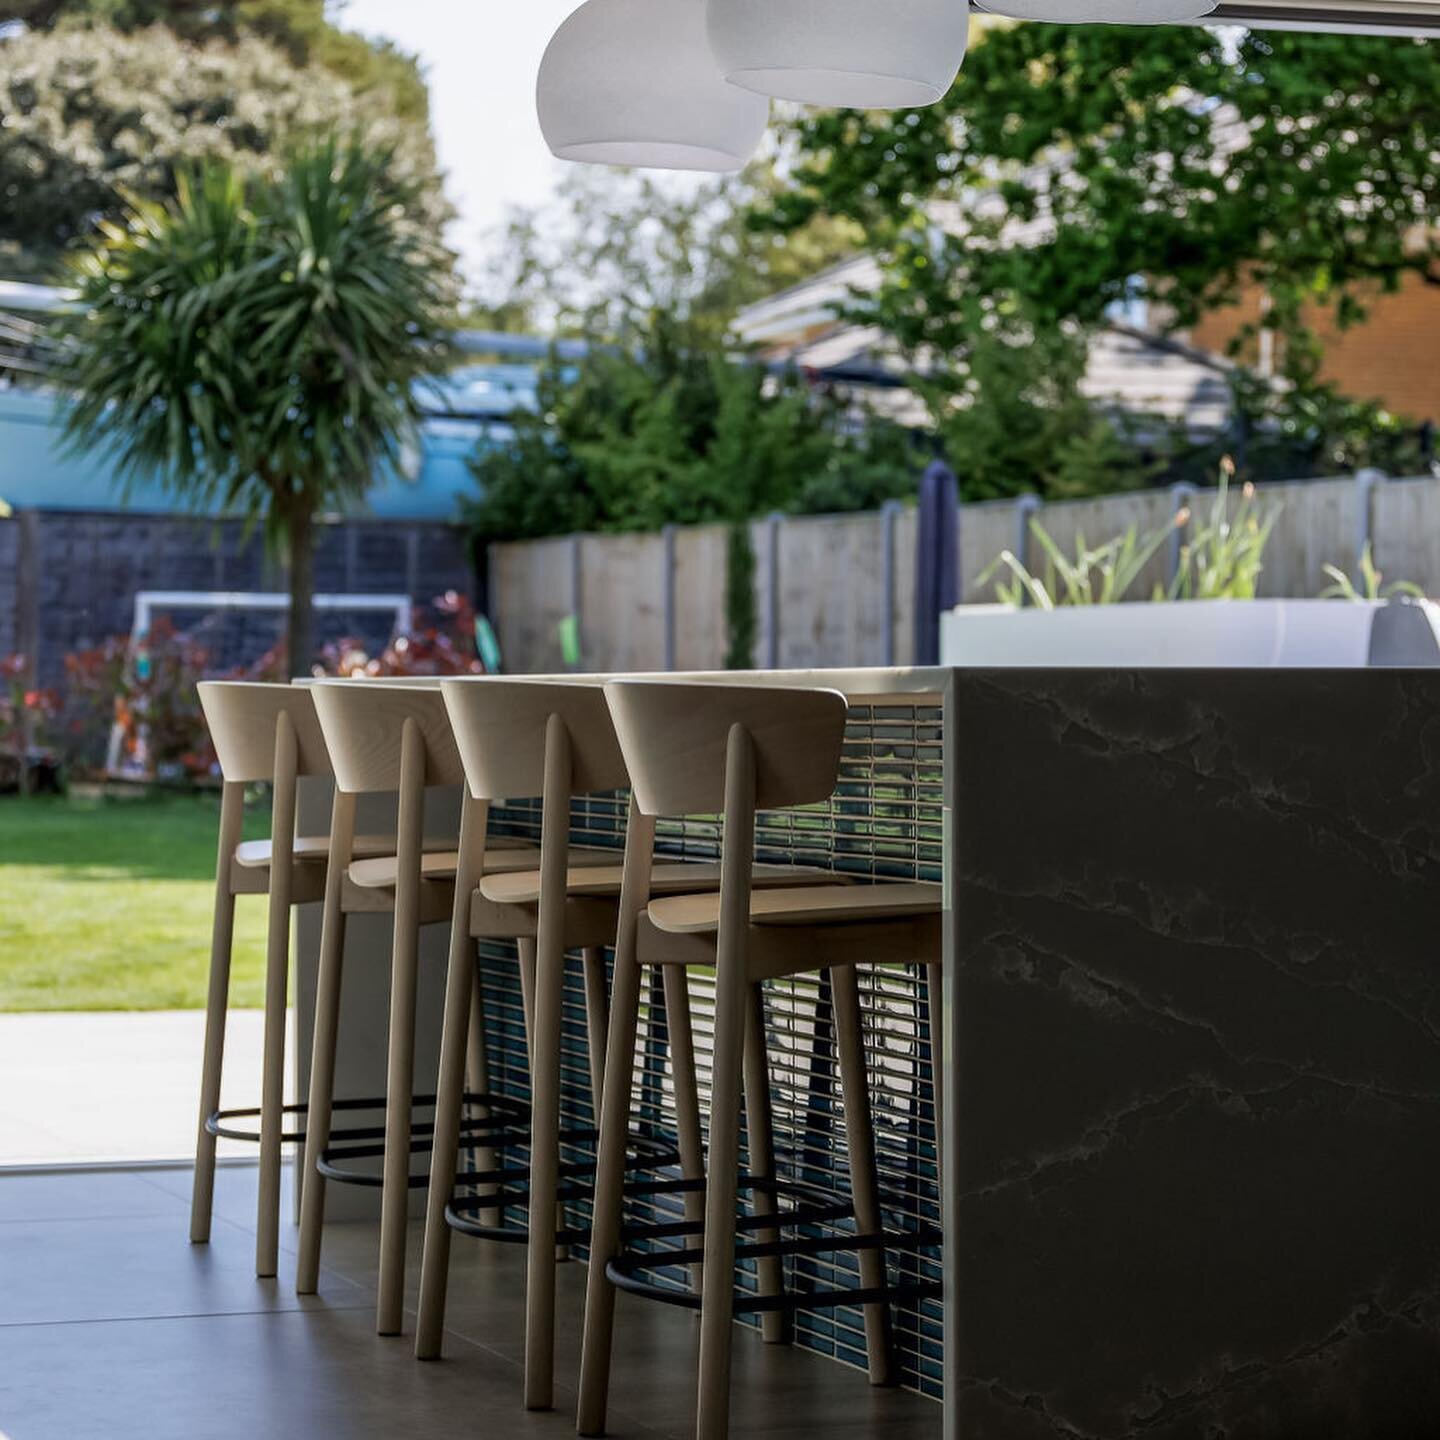 Wishing that warm summer sunshine would come back out to play! ☀️

As architects, we love designing spaces that immerse our indoor spaces with our outdoor garden spaces - for summer and winter! 

Large sliding doors make the transition seamless when 